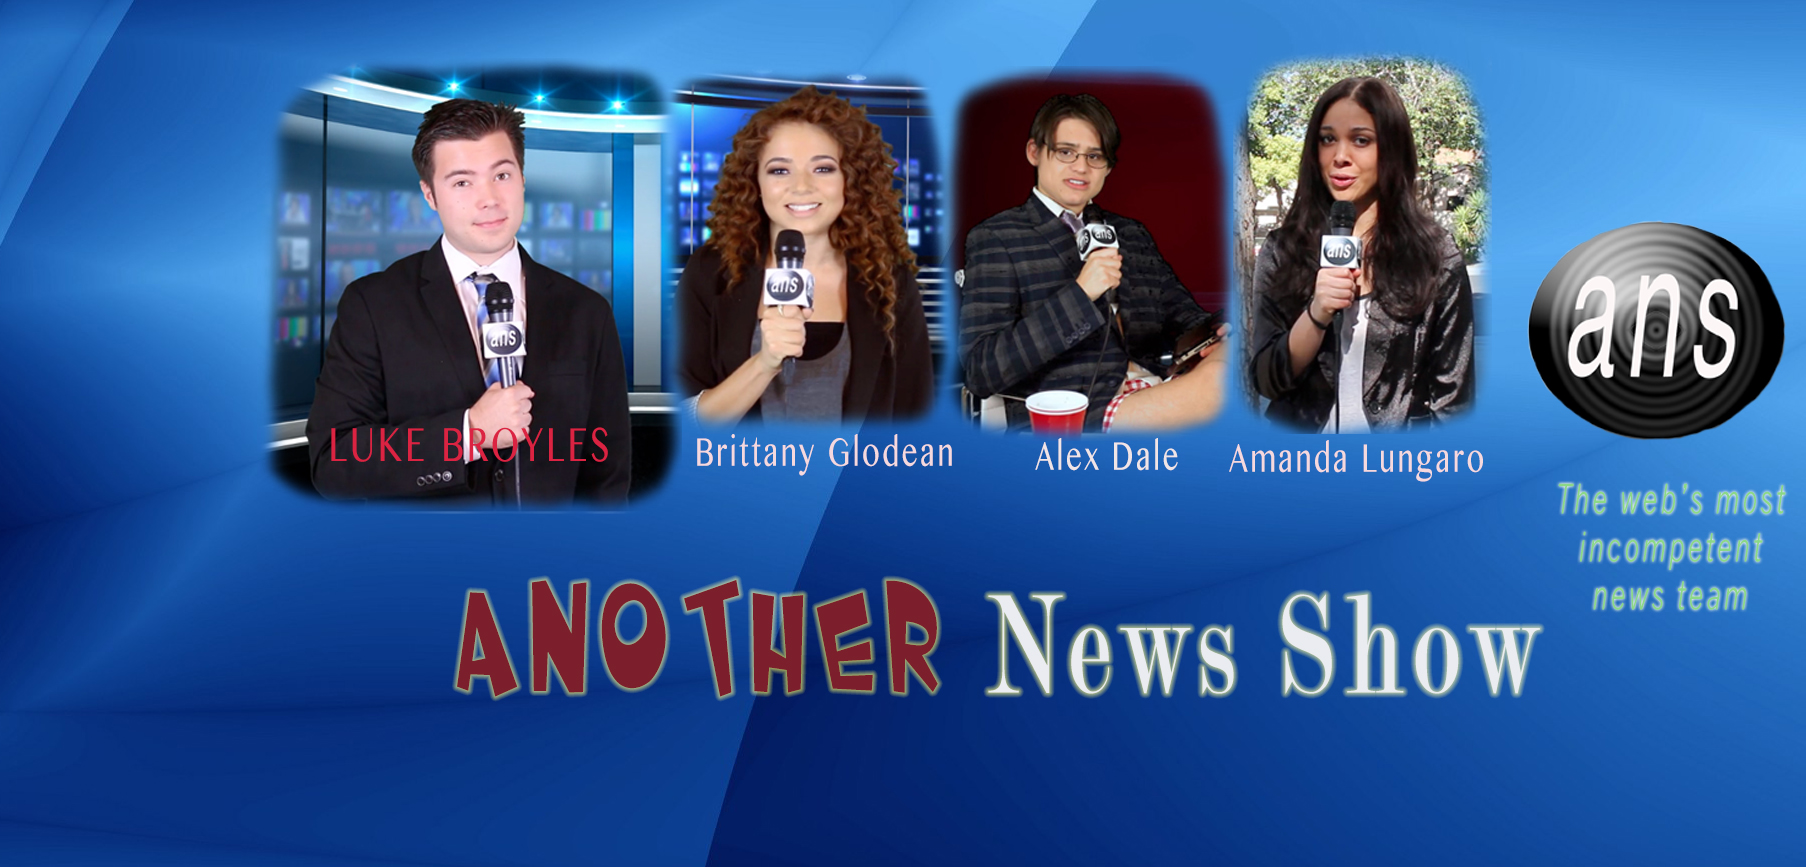 Another News Show - new teen comedy web series